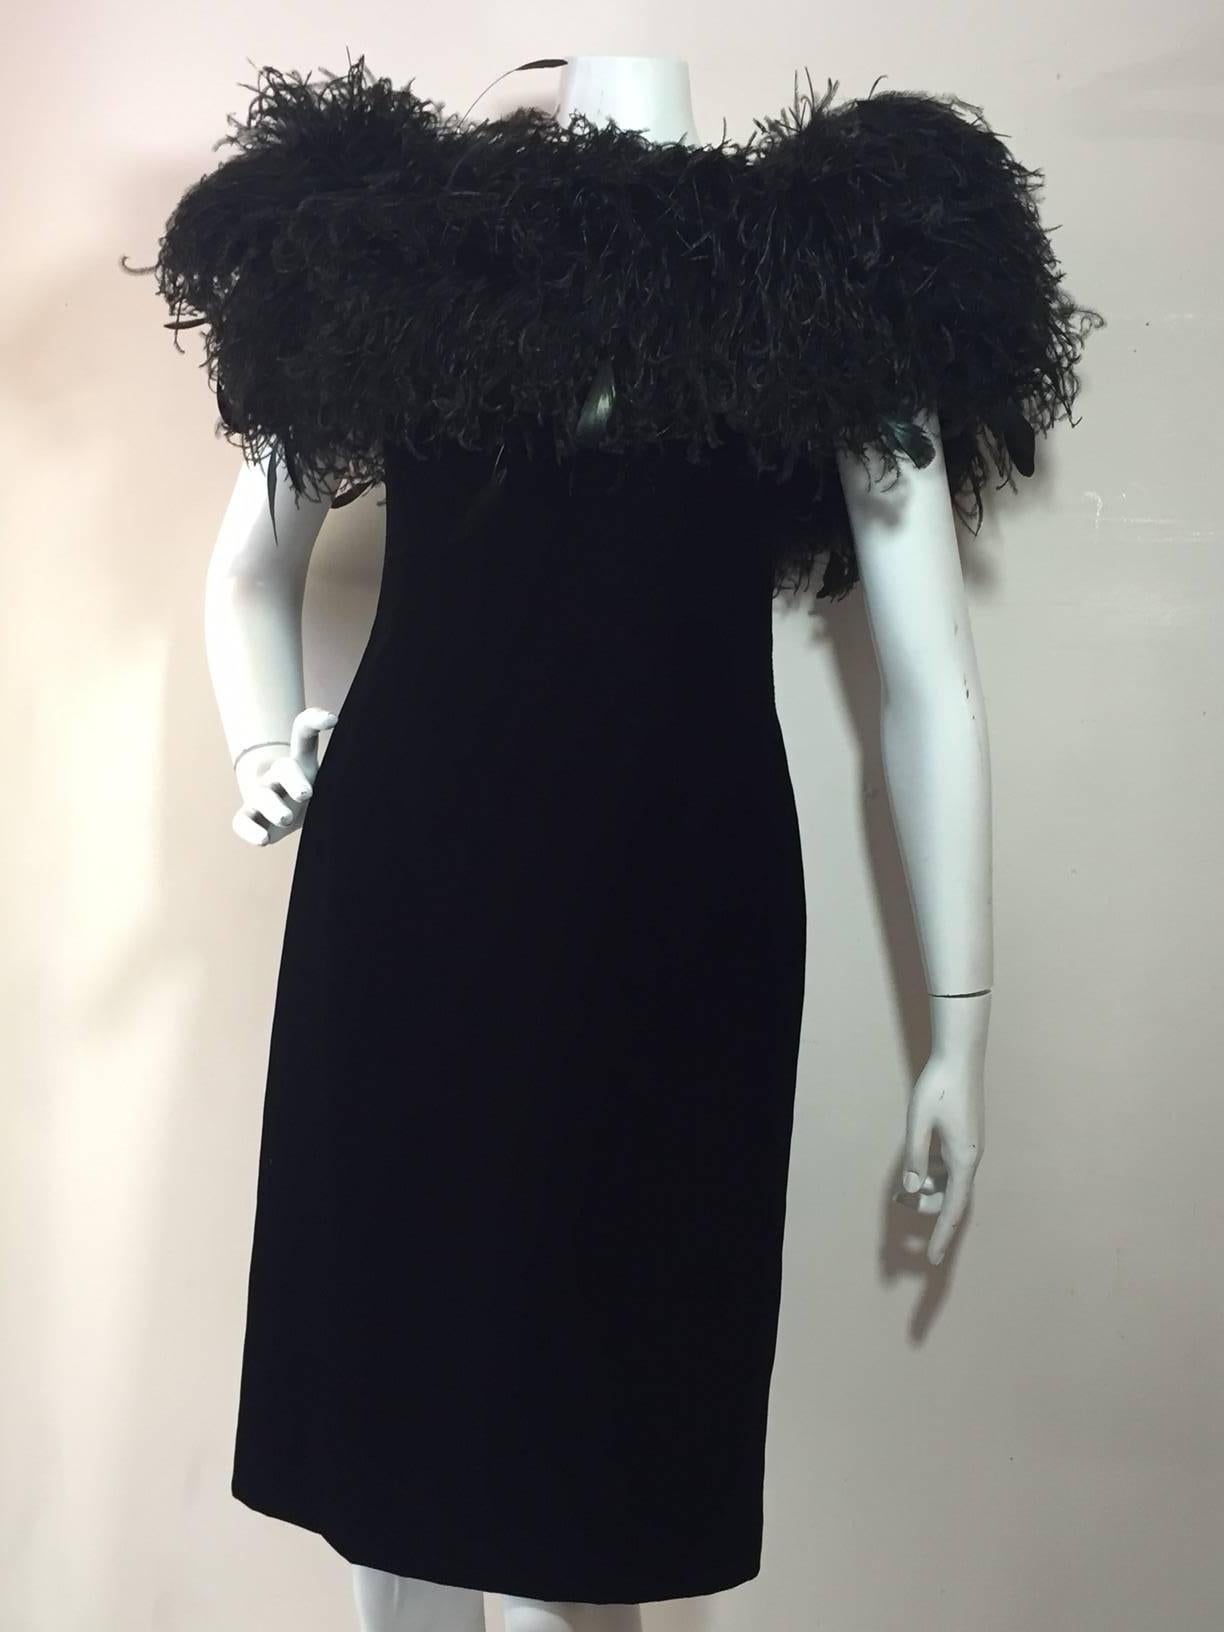 A fabulous and extravagant 1980s Victor Costa black velvet strapless cocktail sheath with off-the-shoulder sleeves, boned bodice and massive ostrich feather neckline. 